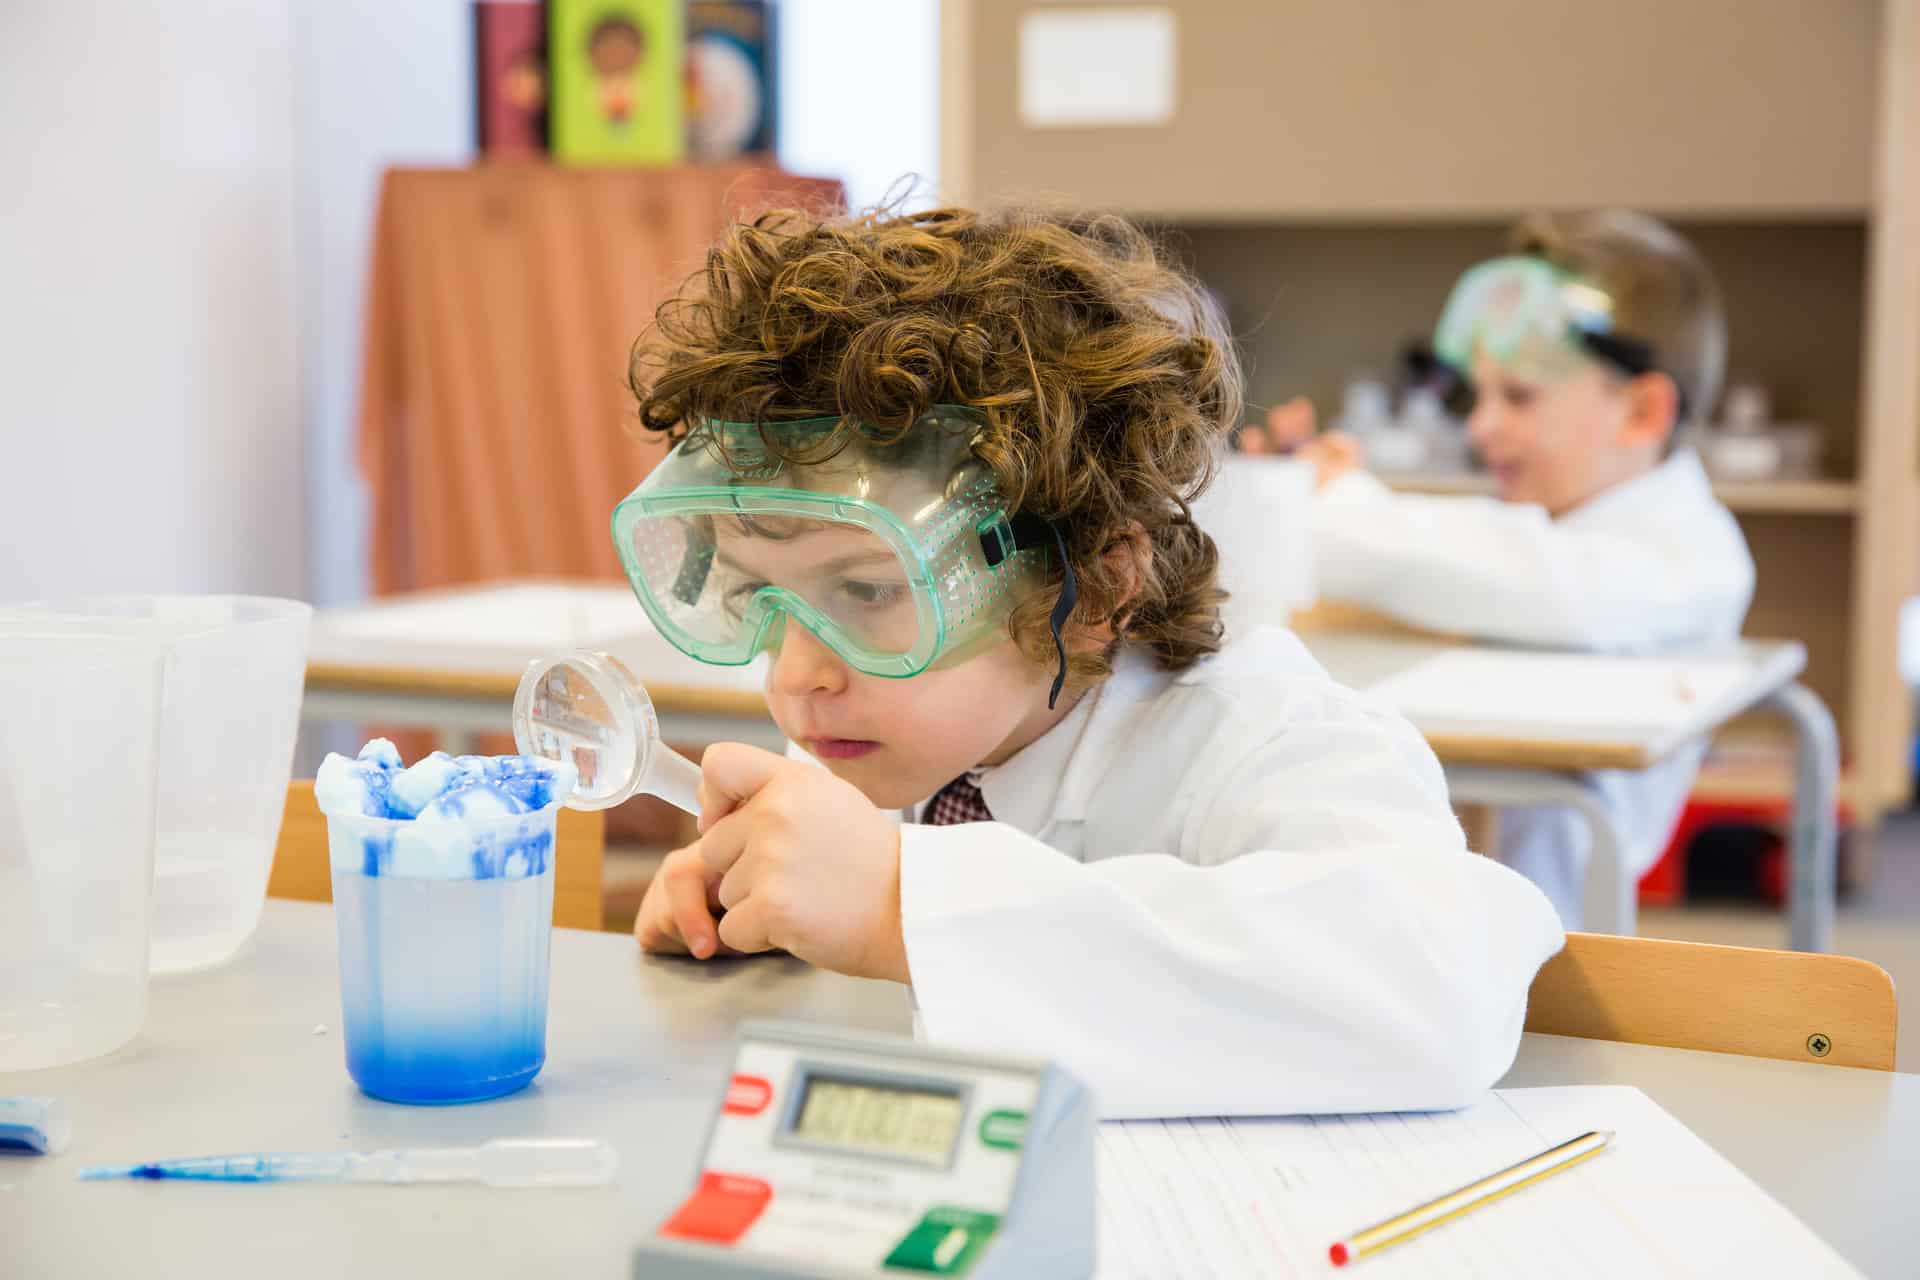 The importance of fueling children's curiosity in STEM education